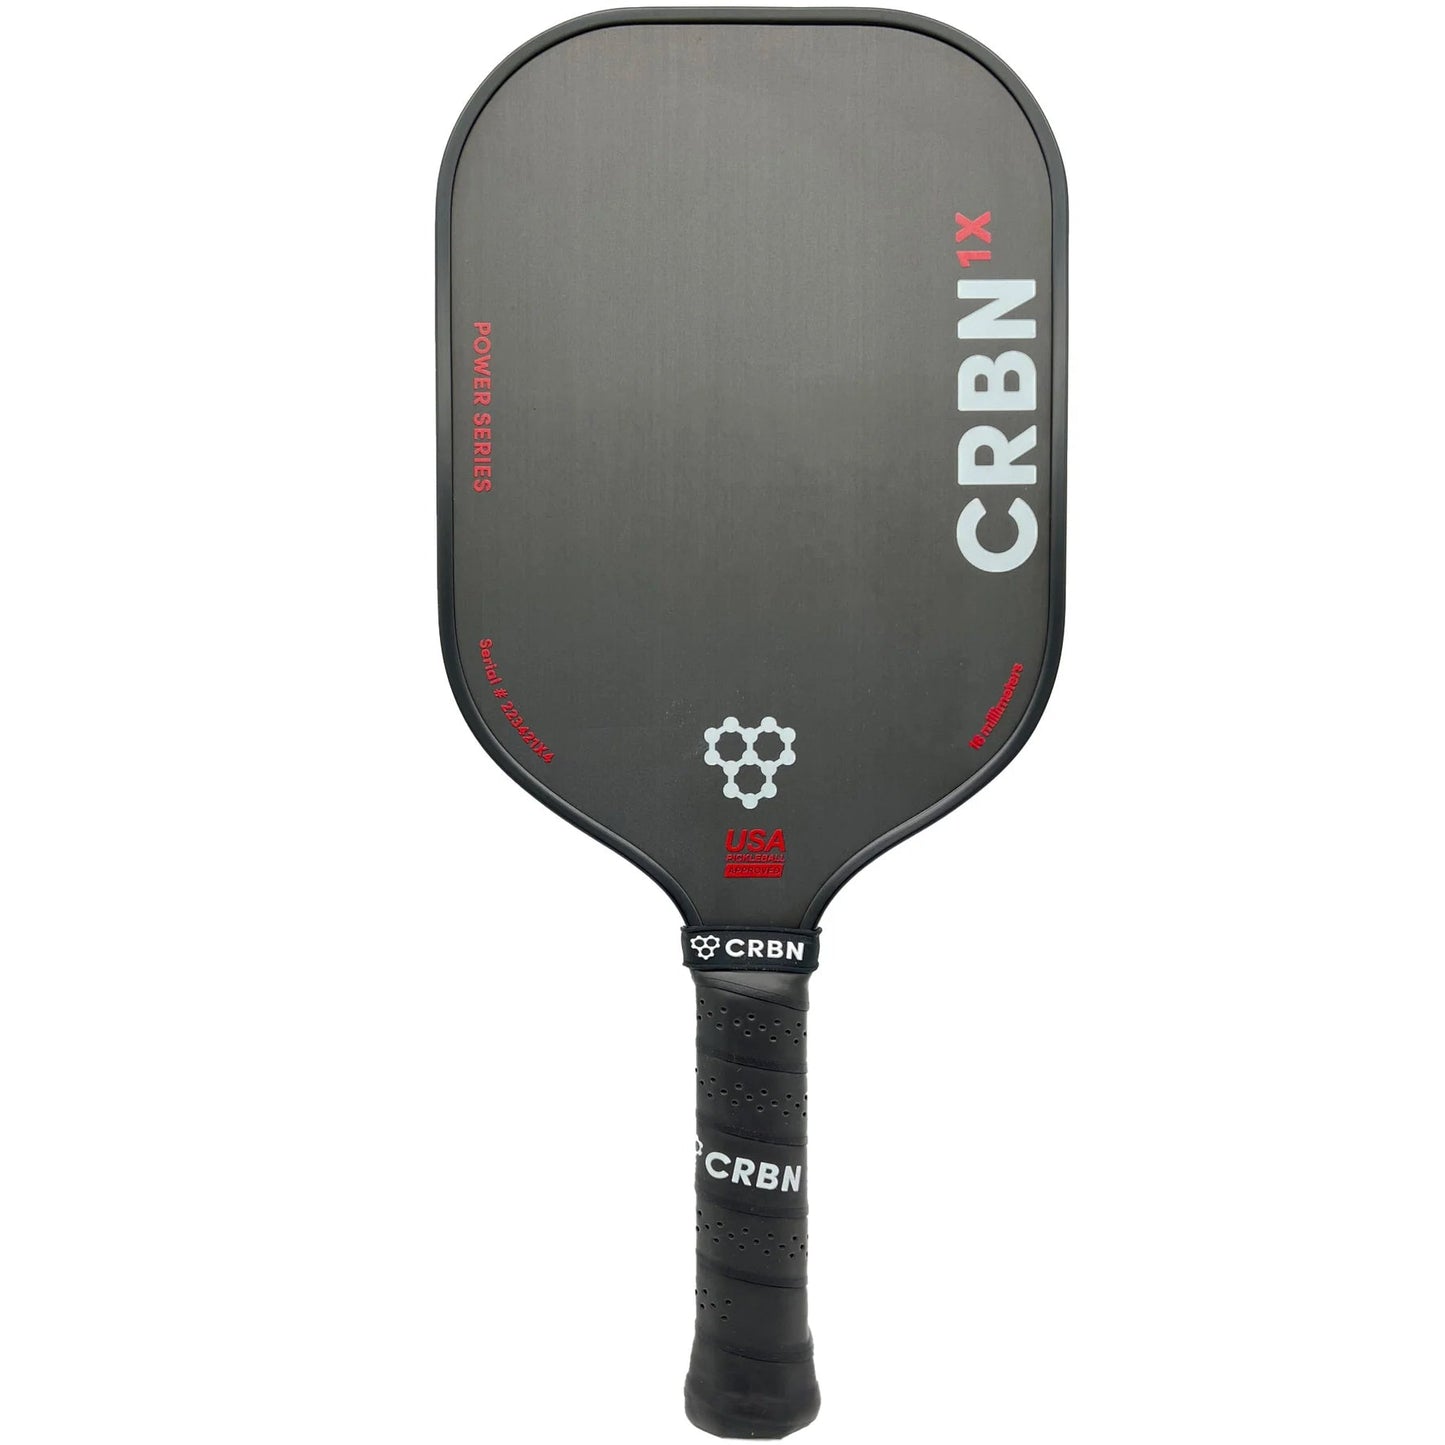 CRBN x racquetball paddle -> CRBN 1X Power Series - 14mm Elongated Pickleball Paddle from the brand CRBN.